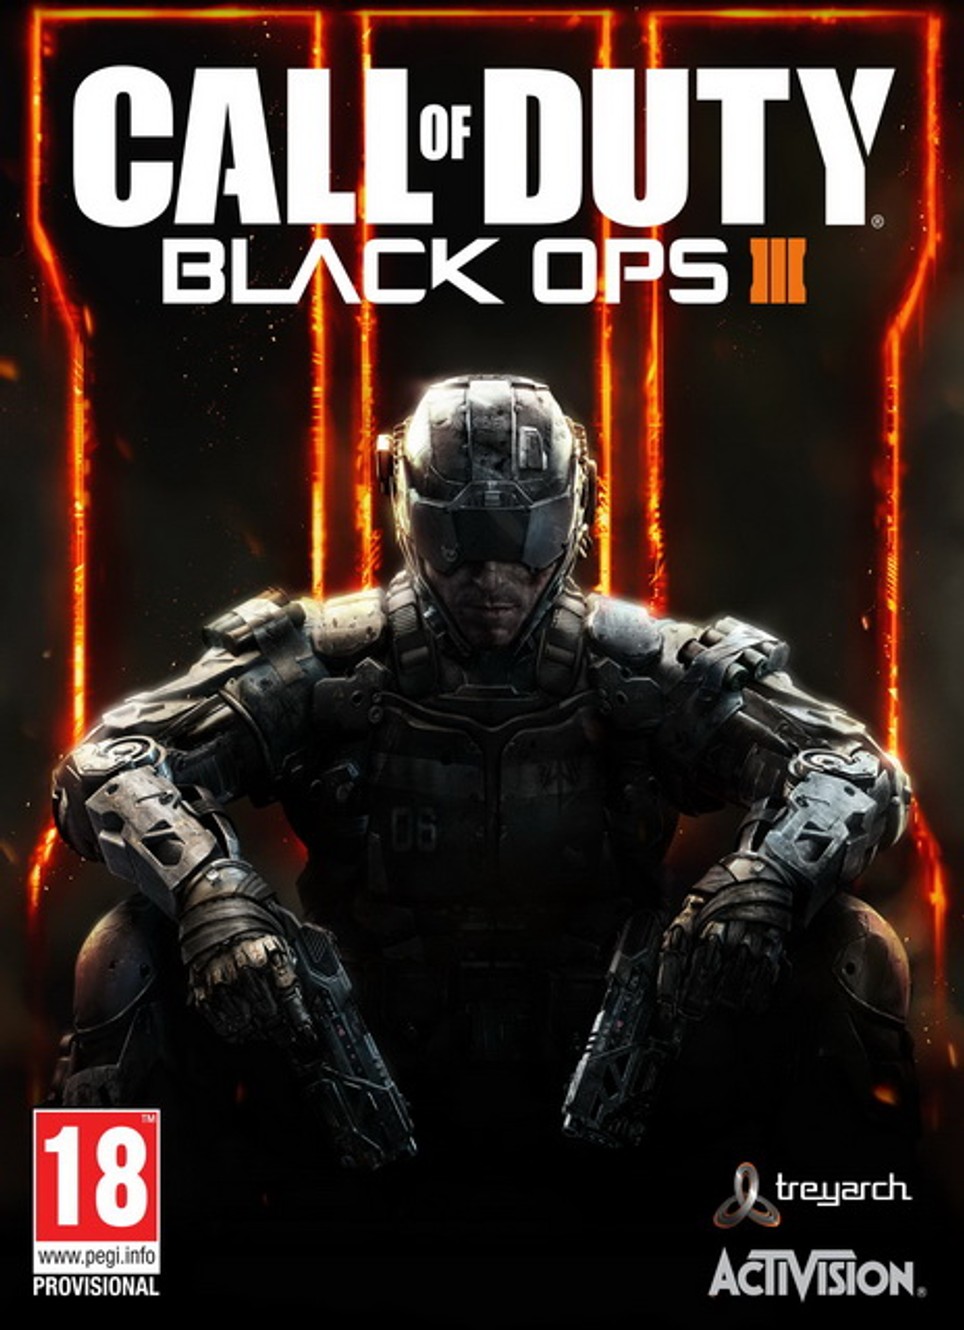 call of duty black ops rezurrection map pack